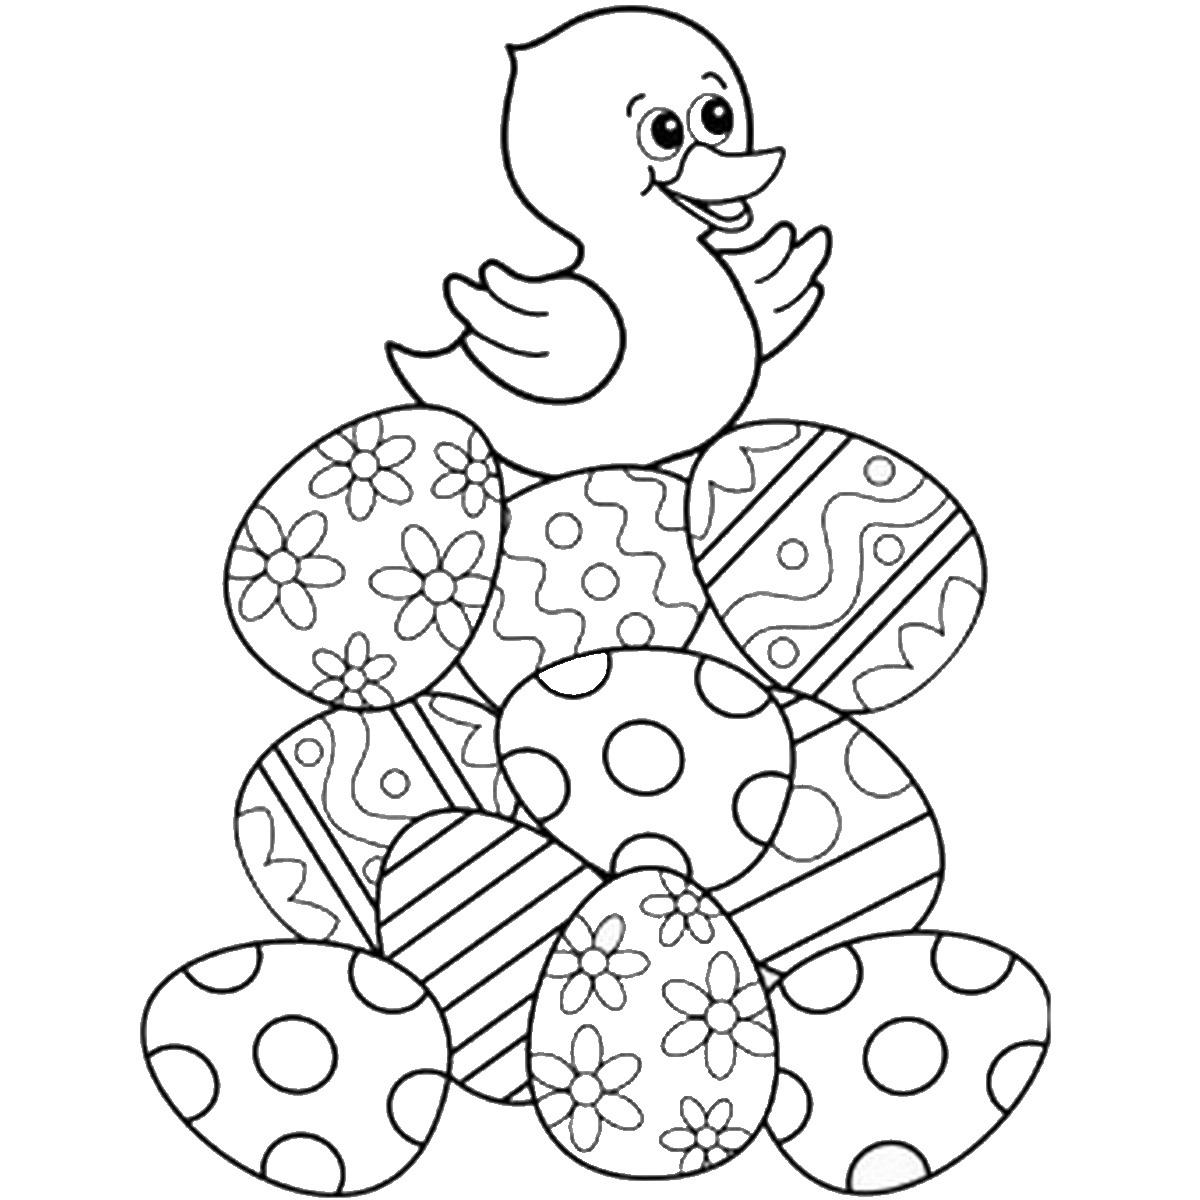 Sewing Machine Coloring Page at GetColorings.com | Free printable